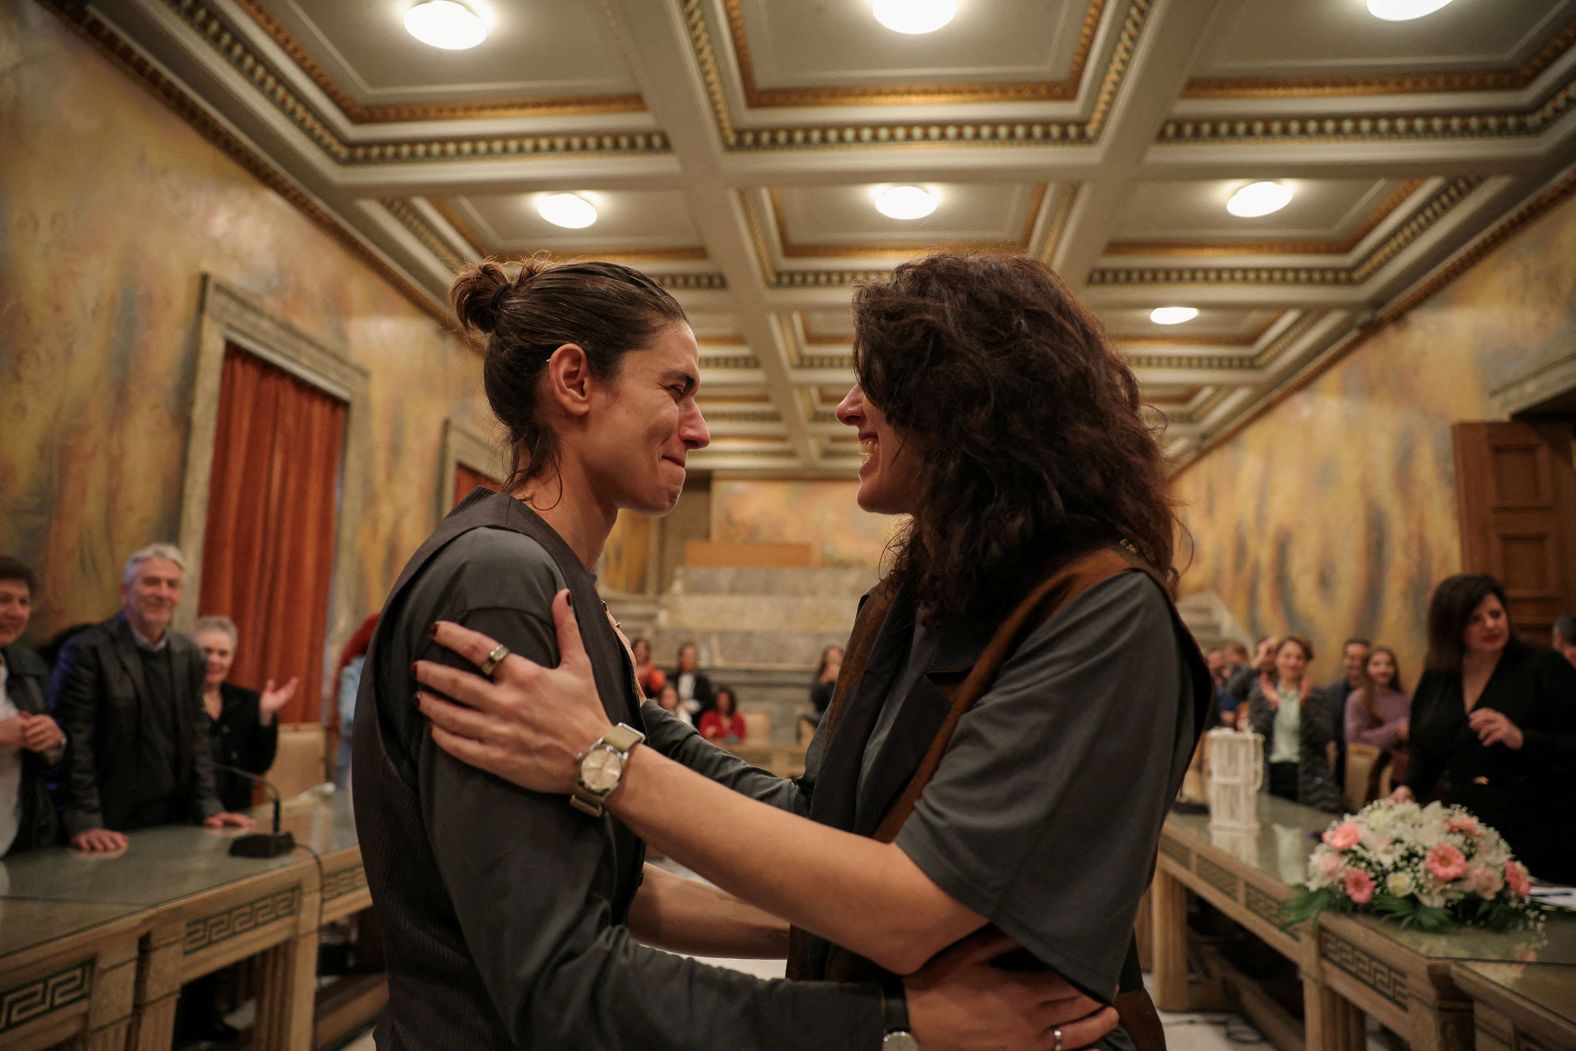 Danai Deligiorgi and Alexia Beziki embrace after their wedding ceremony at the Athens Town Hall in Athens, Greece, on Thursday, March 7. They were one of the first couples to marry after <a href="index.php?page=&url=https%3A%2F%2Fwww.cnn.com%2F2024%2F02%2F15%2Feurope%2Fgreece-same-sex-marriage-legal-intl%2Findex.html" target="_blank">the passing of legislation for same-sex marriages</a>.